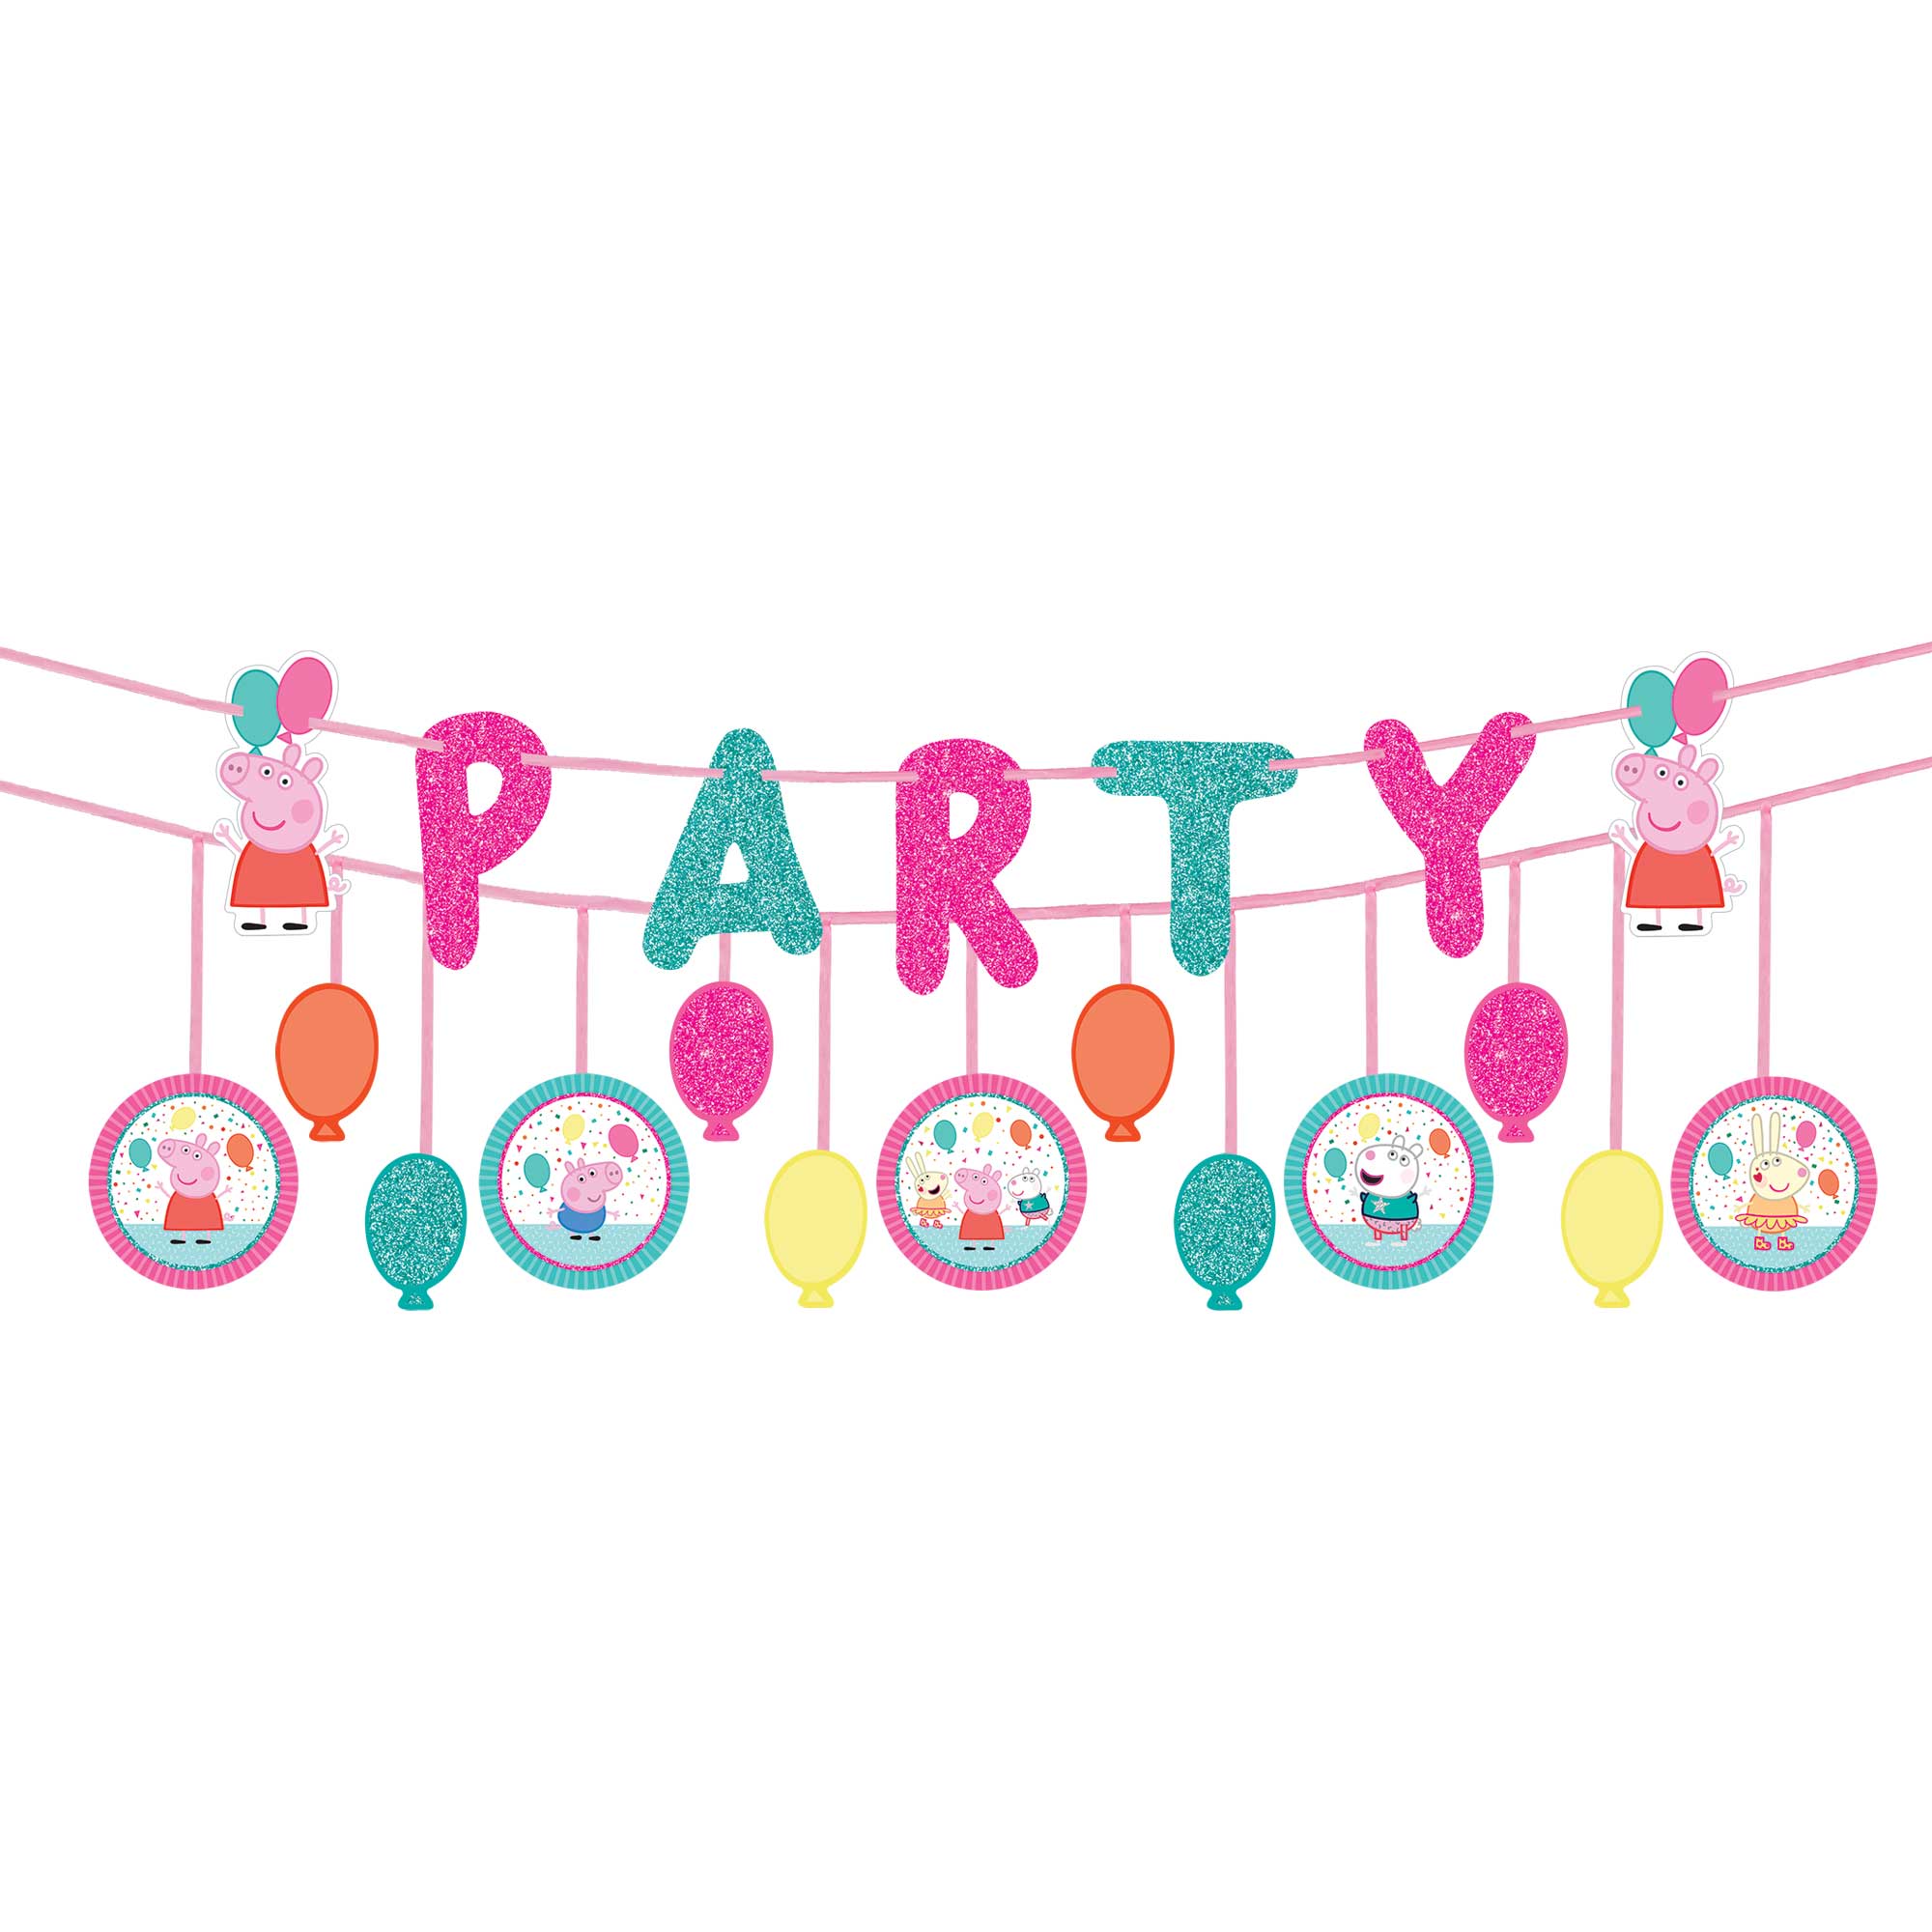 Peppa Pig Confetti Party Ribbon Banner Kit Glittered - 2 Pack Default Title